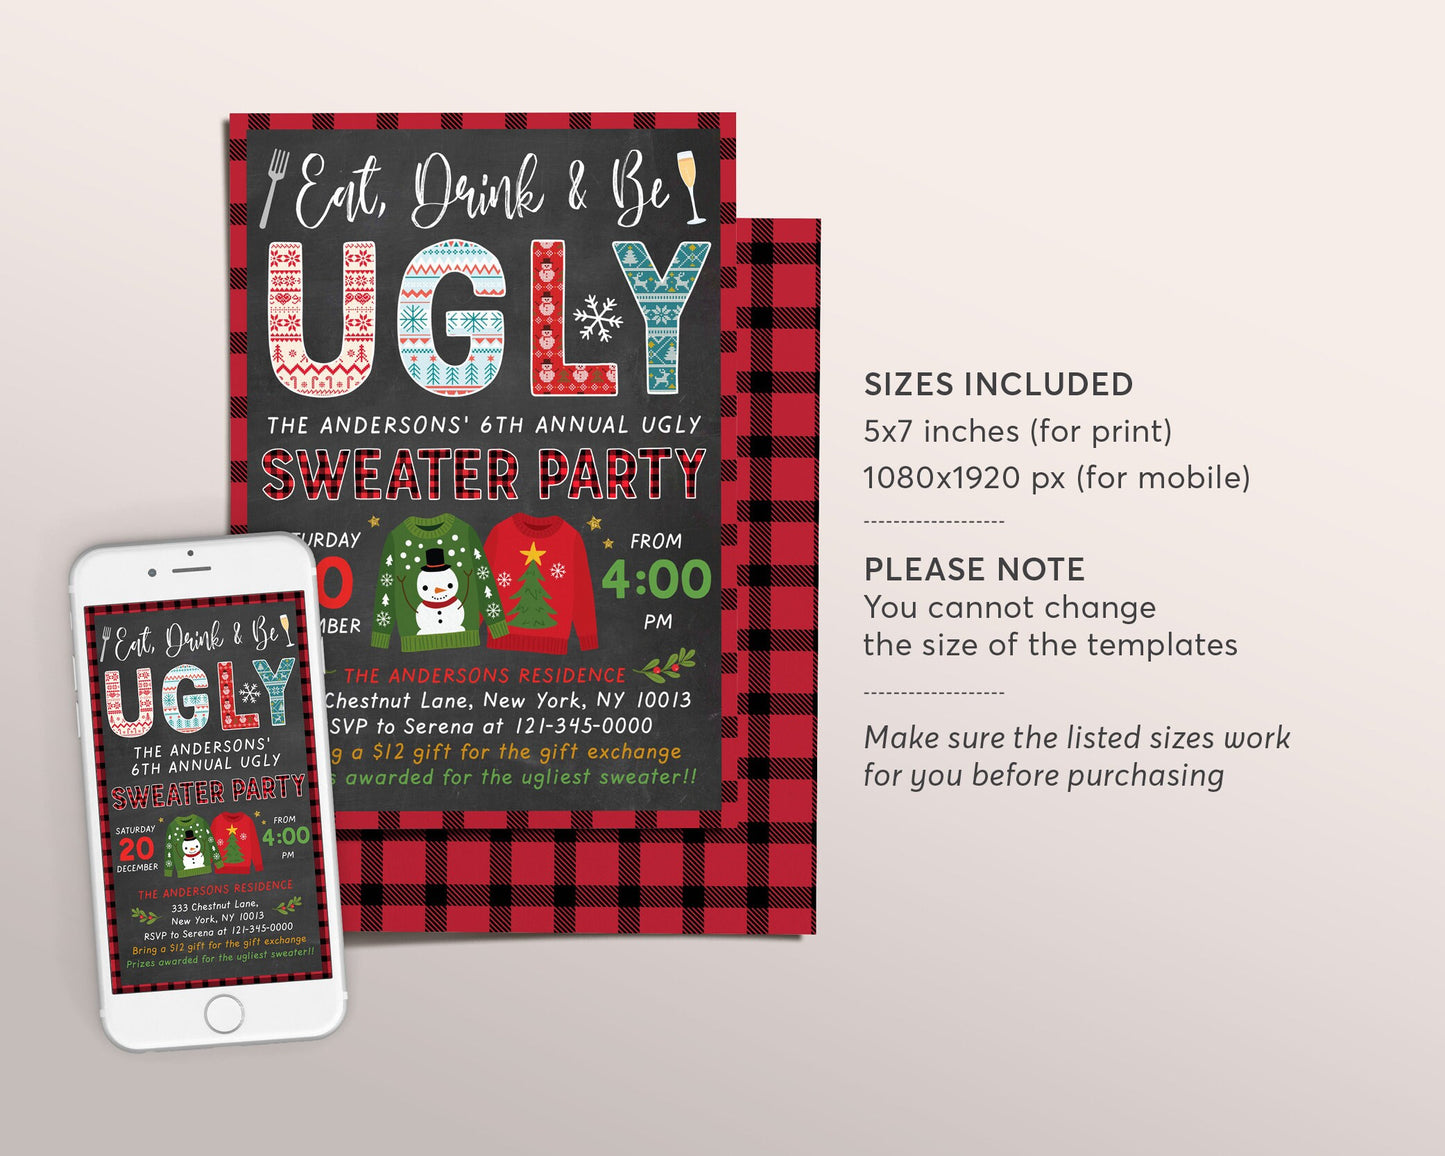 Eat Drink And Be Ugly Invitation Editable Template, Ugly Sweater Contest, Christmas Office Xmas Party Invite For Adults Holiday Party Bash